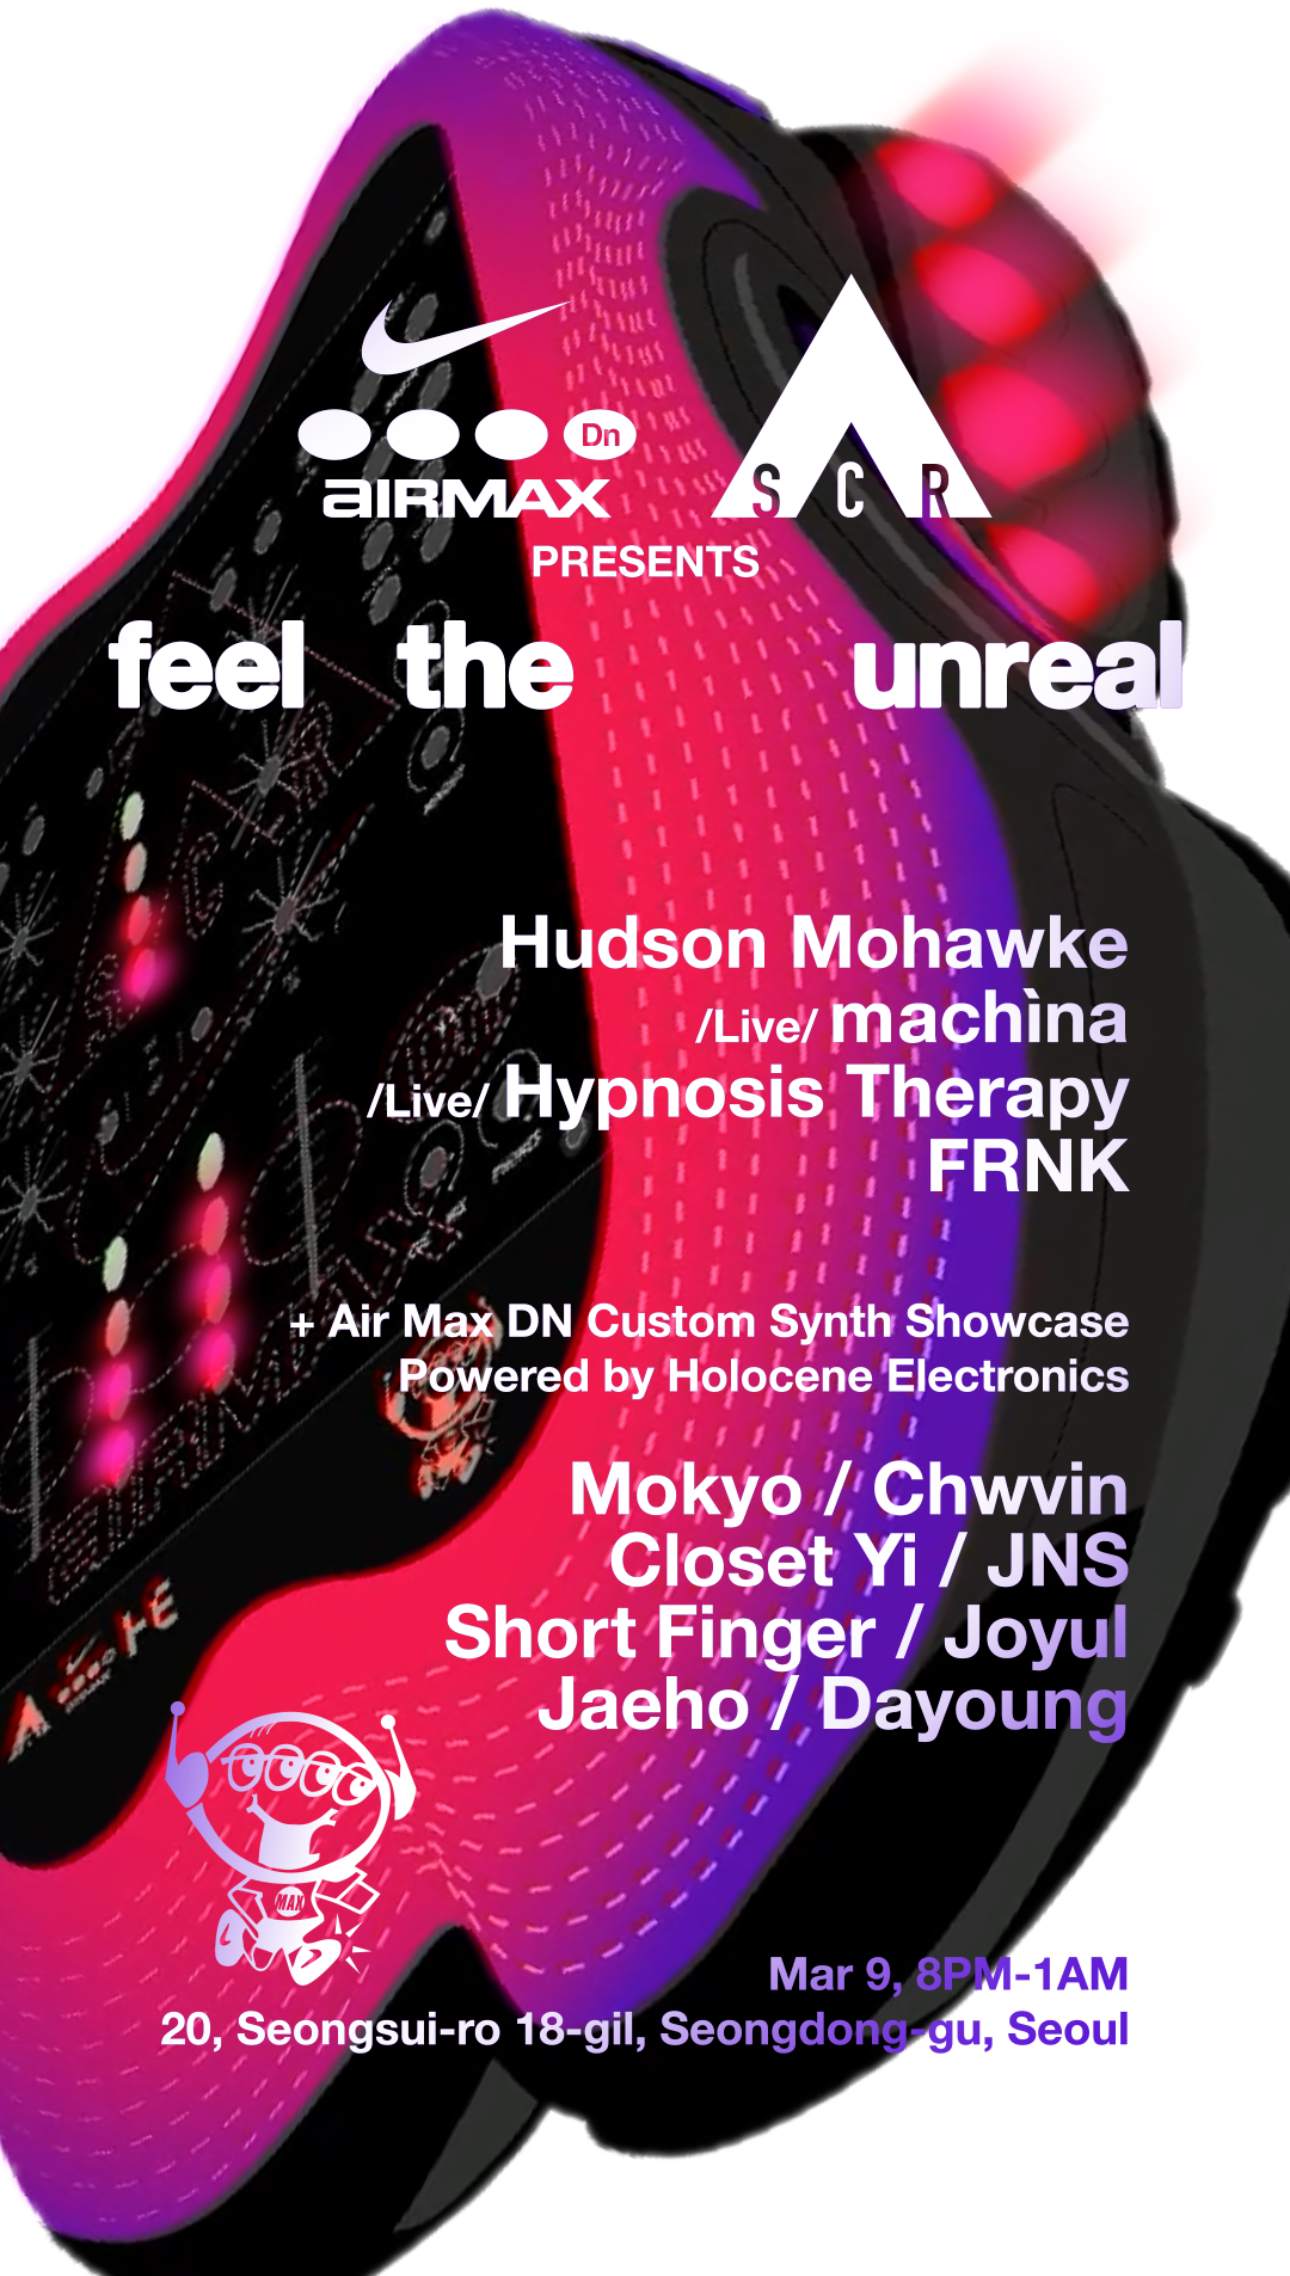 Nike Air Max & SCR present 'feel the unreal' with Hudson Mohawke - フライヤー表